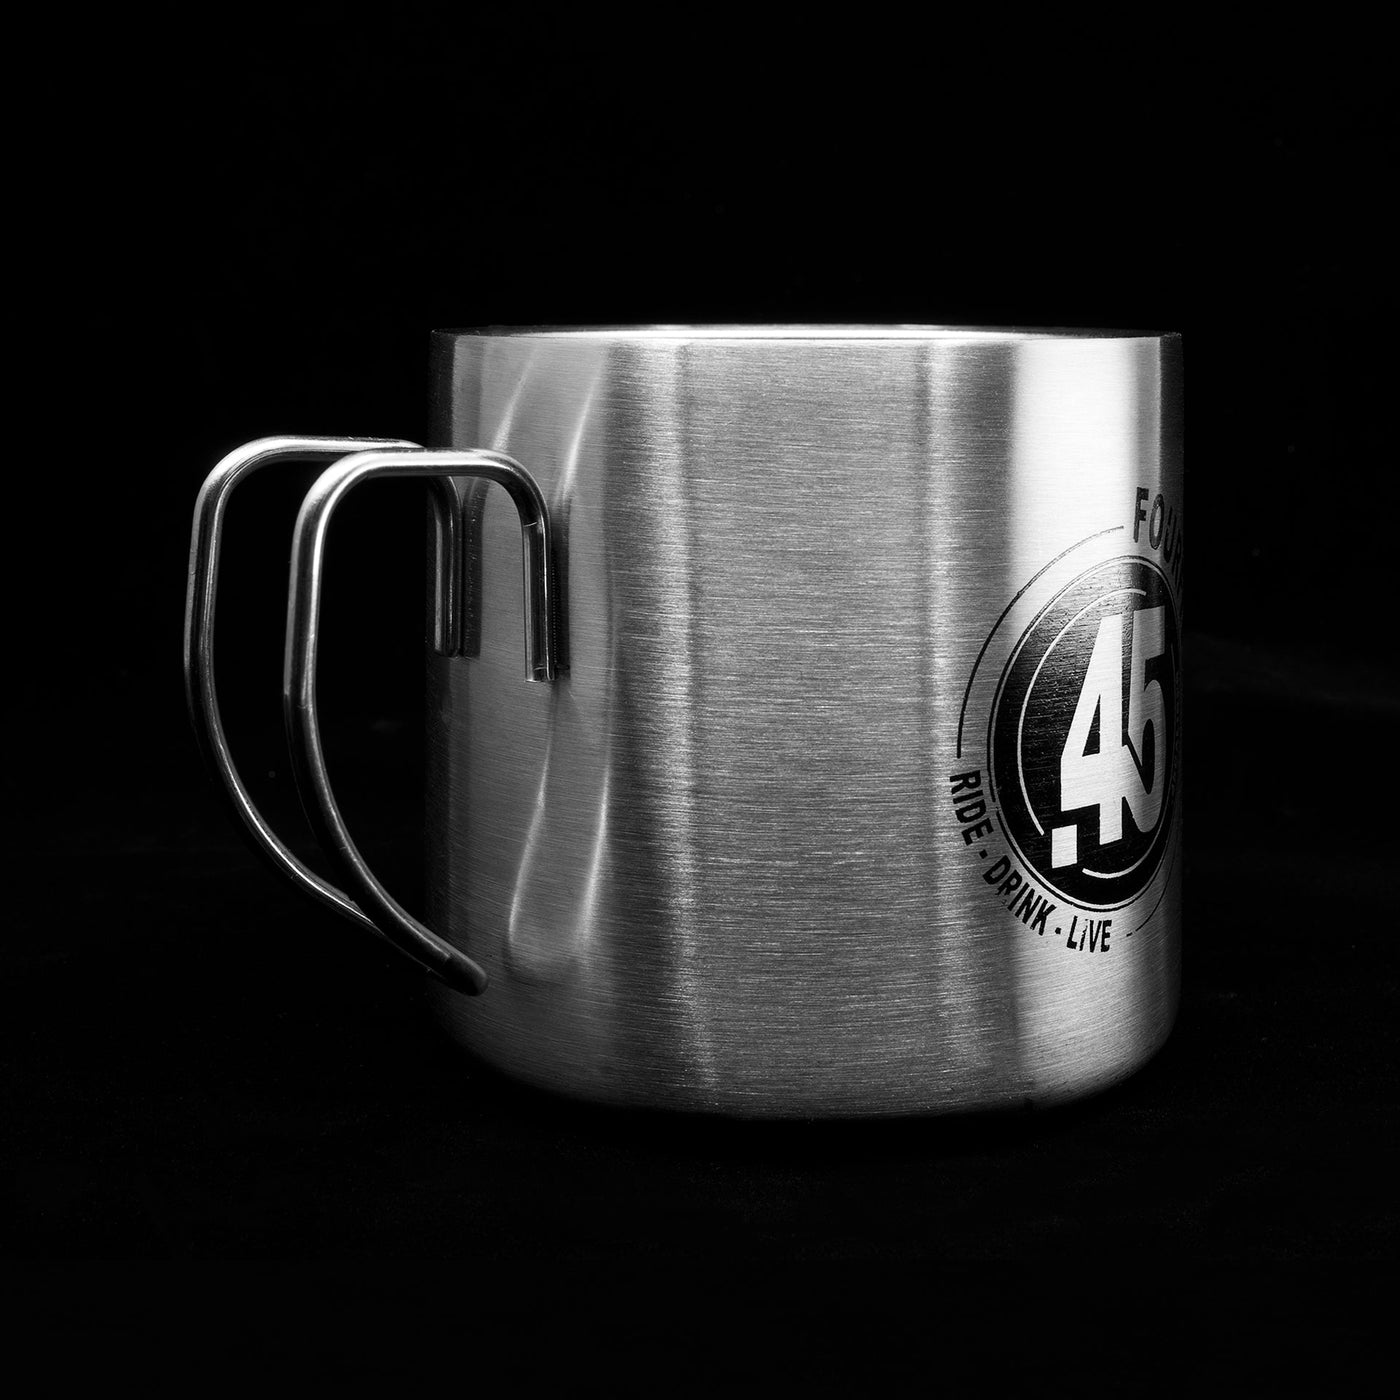 A Fourfive 45 ACP coffee mug in double walled stainless steel construction with graphics on its body facing 45 degrees to the right in black background.